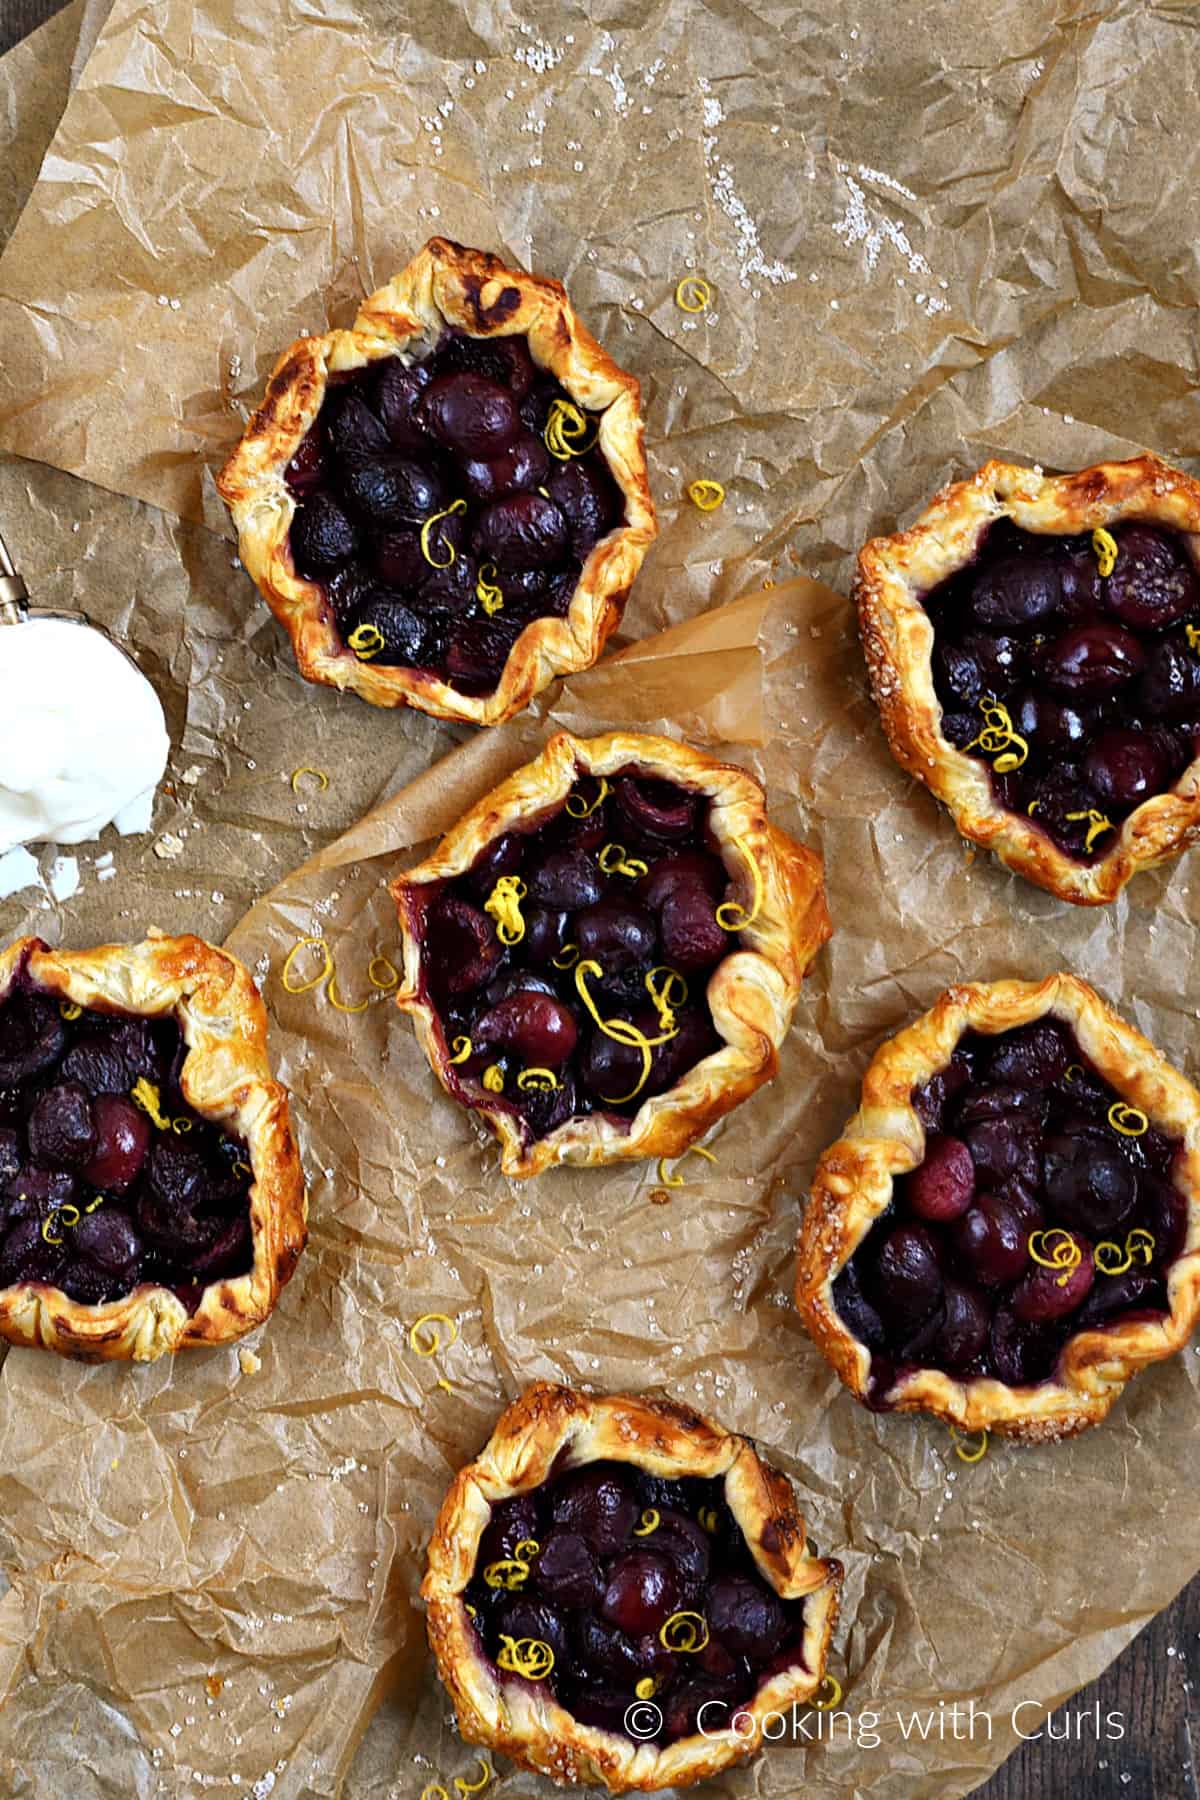 Six puff pastry tart shells filled with cherries.